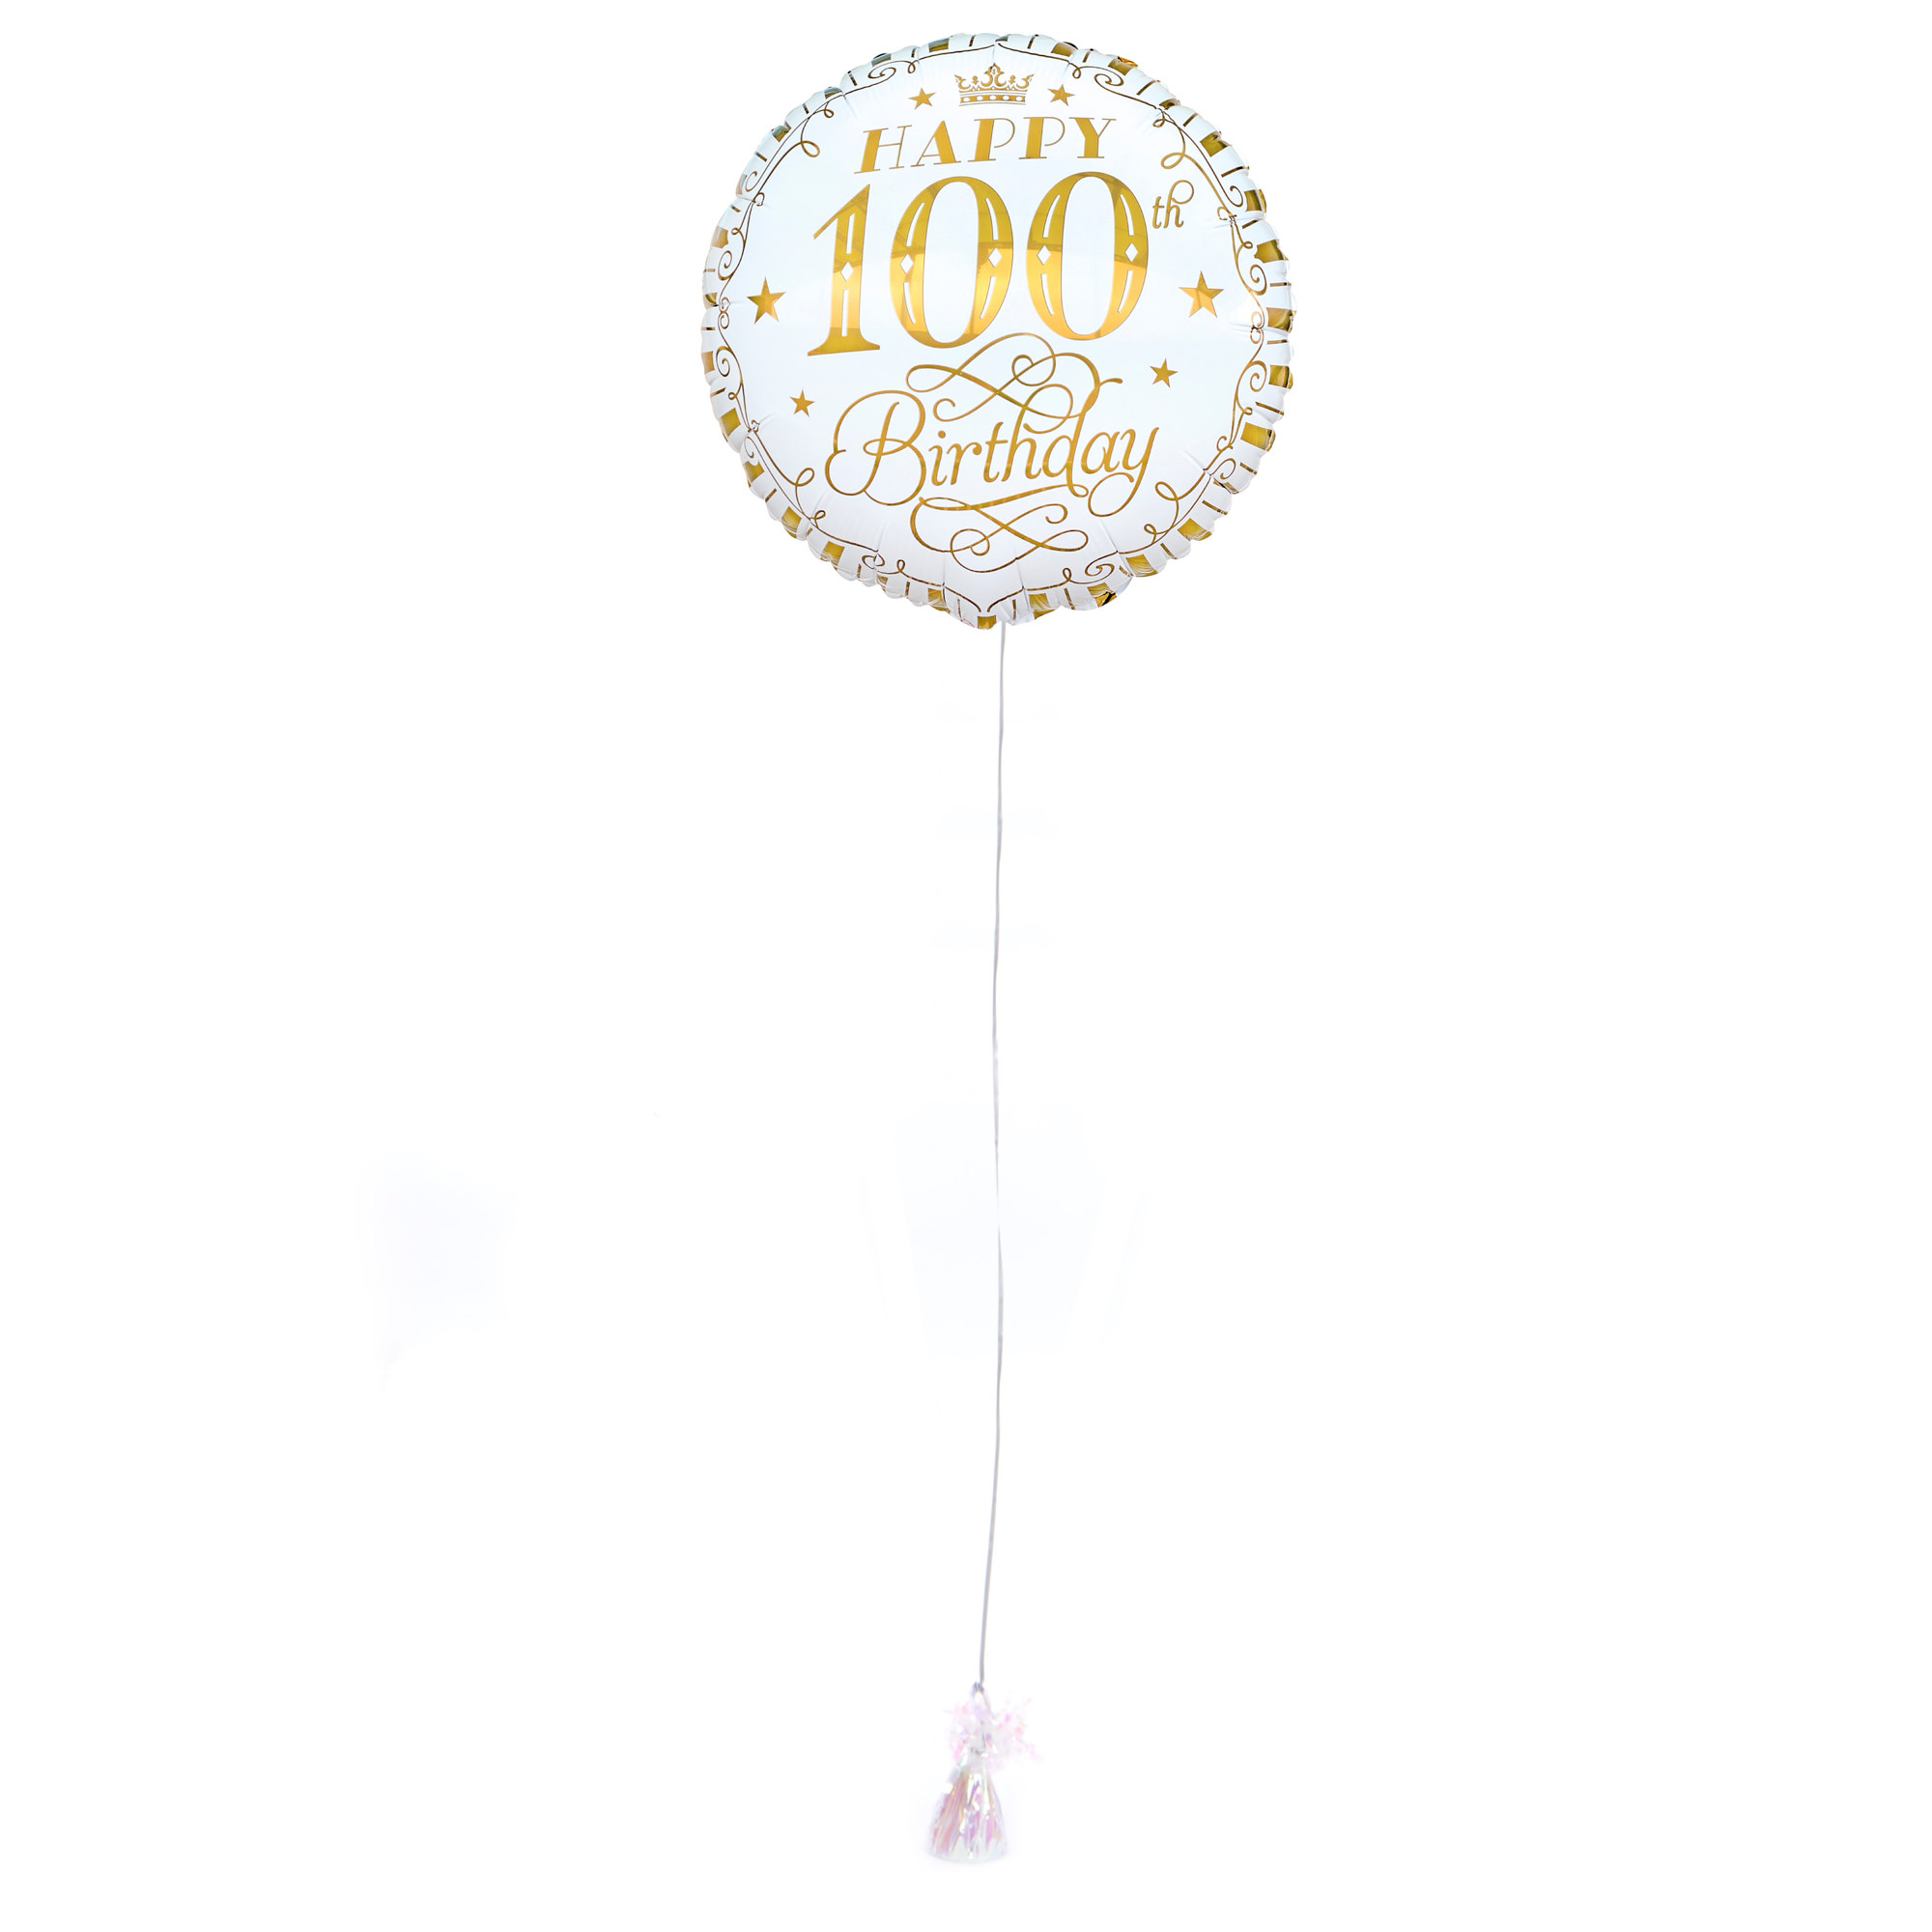 White & Gold 100th Birthday Balloon & Lindt Chocolates - FREE GIFT CARD!